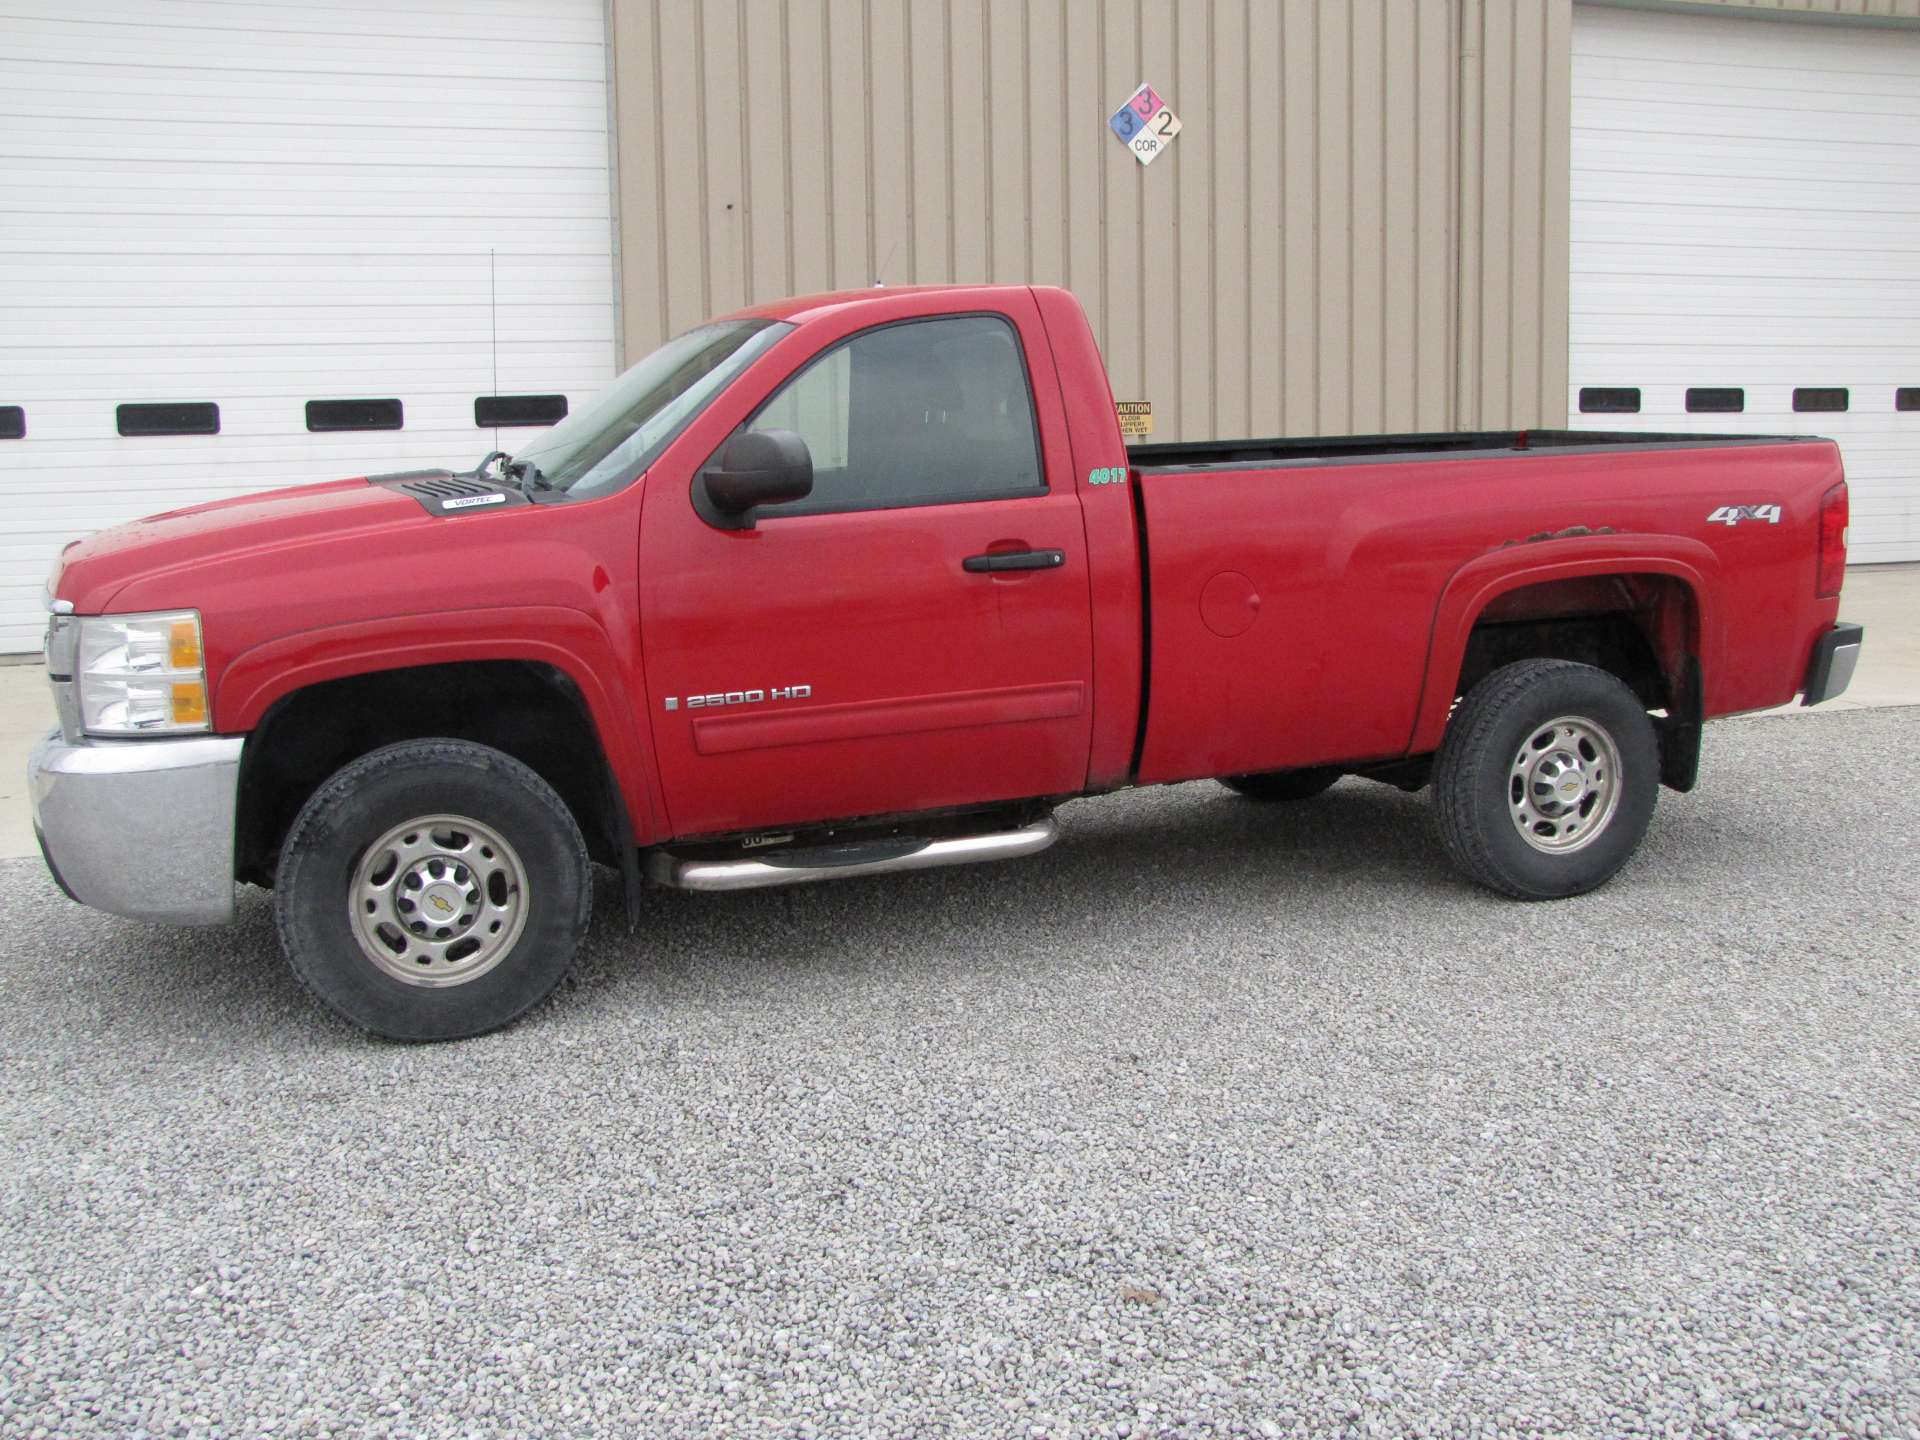 2009 Chevy 2500 HD LT pickup truck - Image 3 of 69